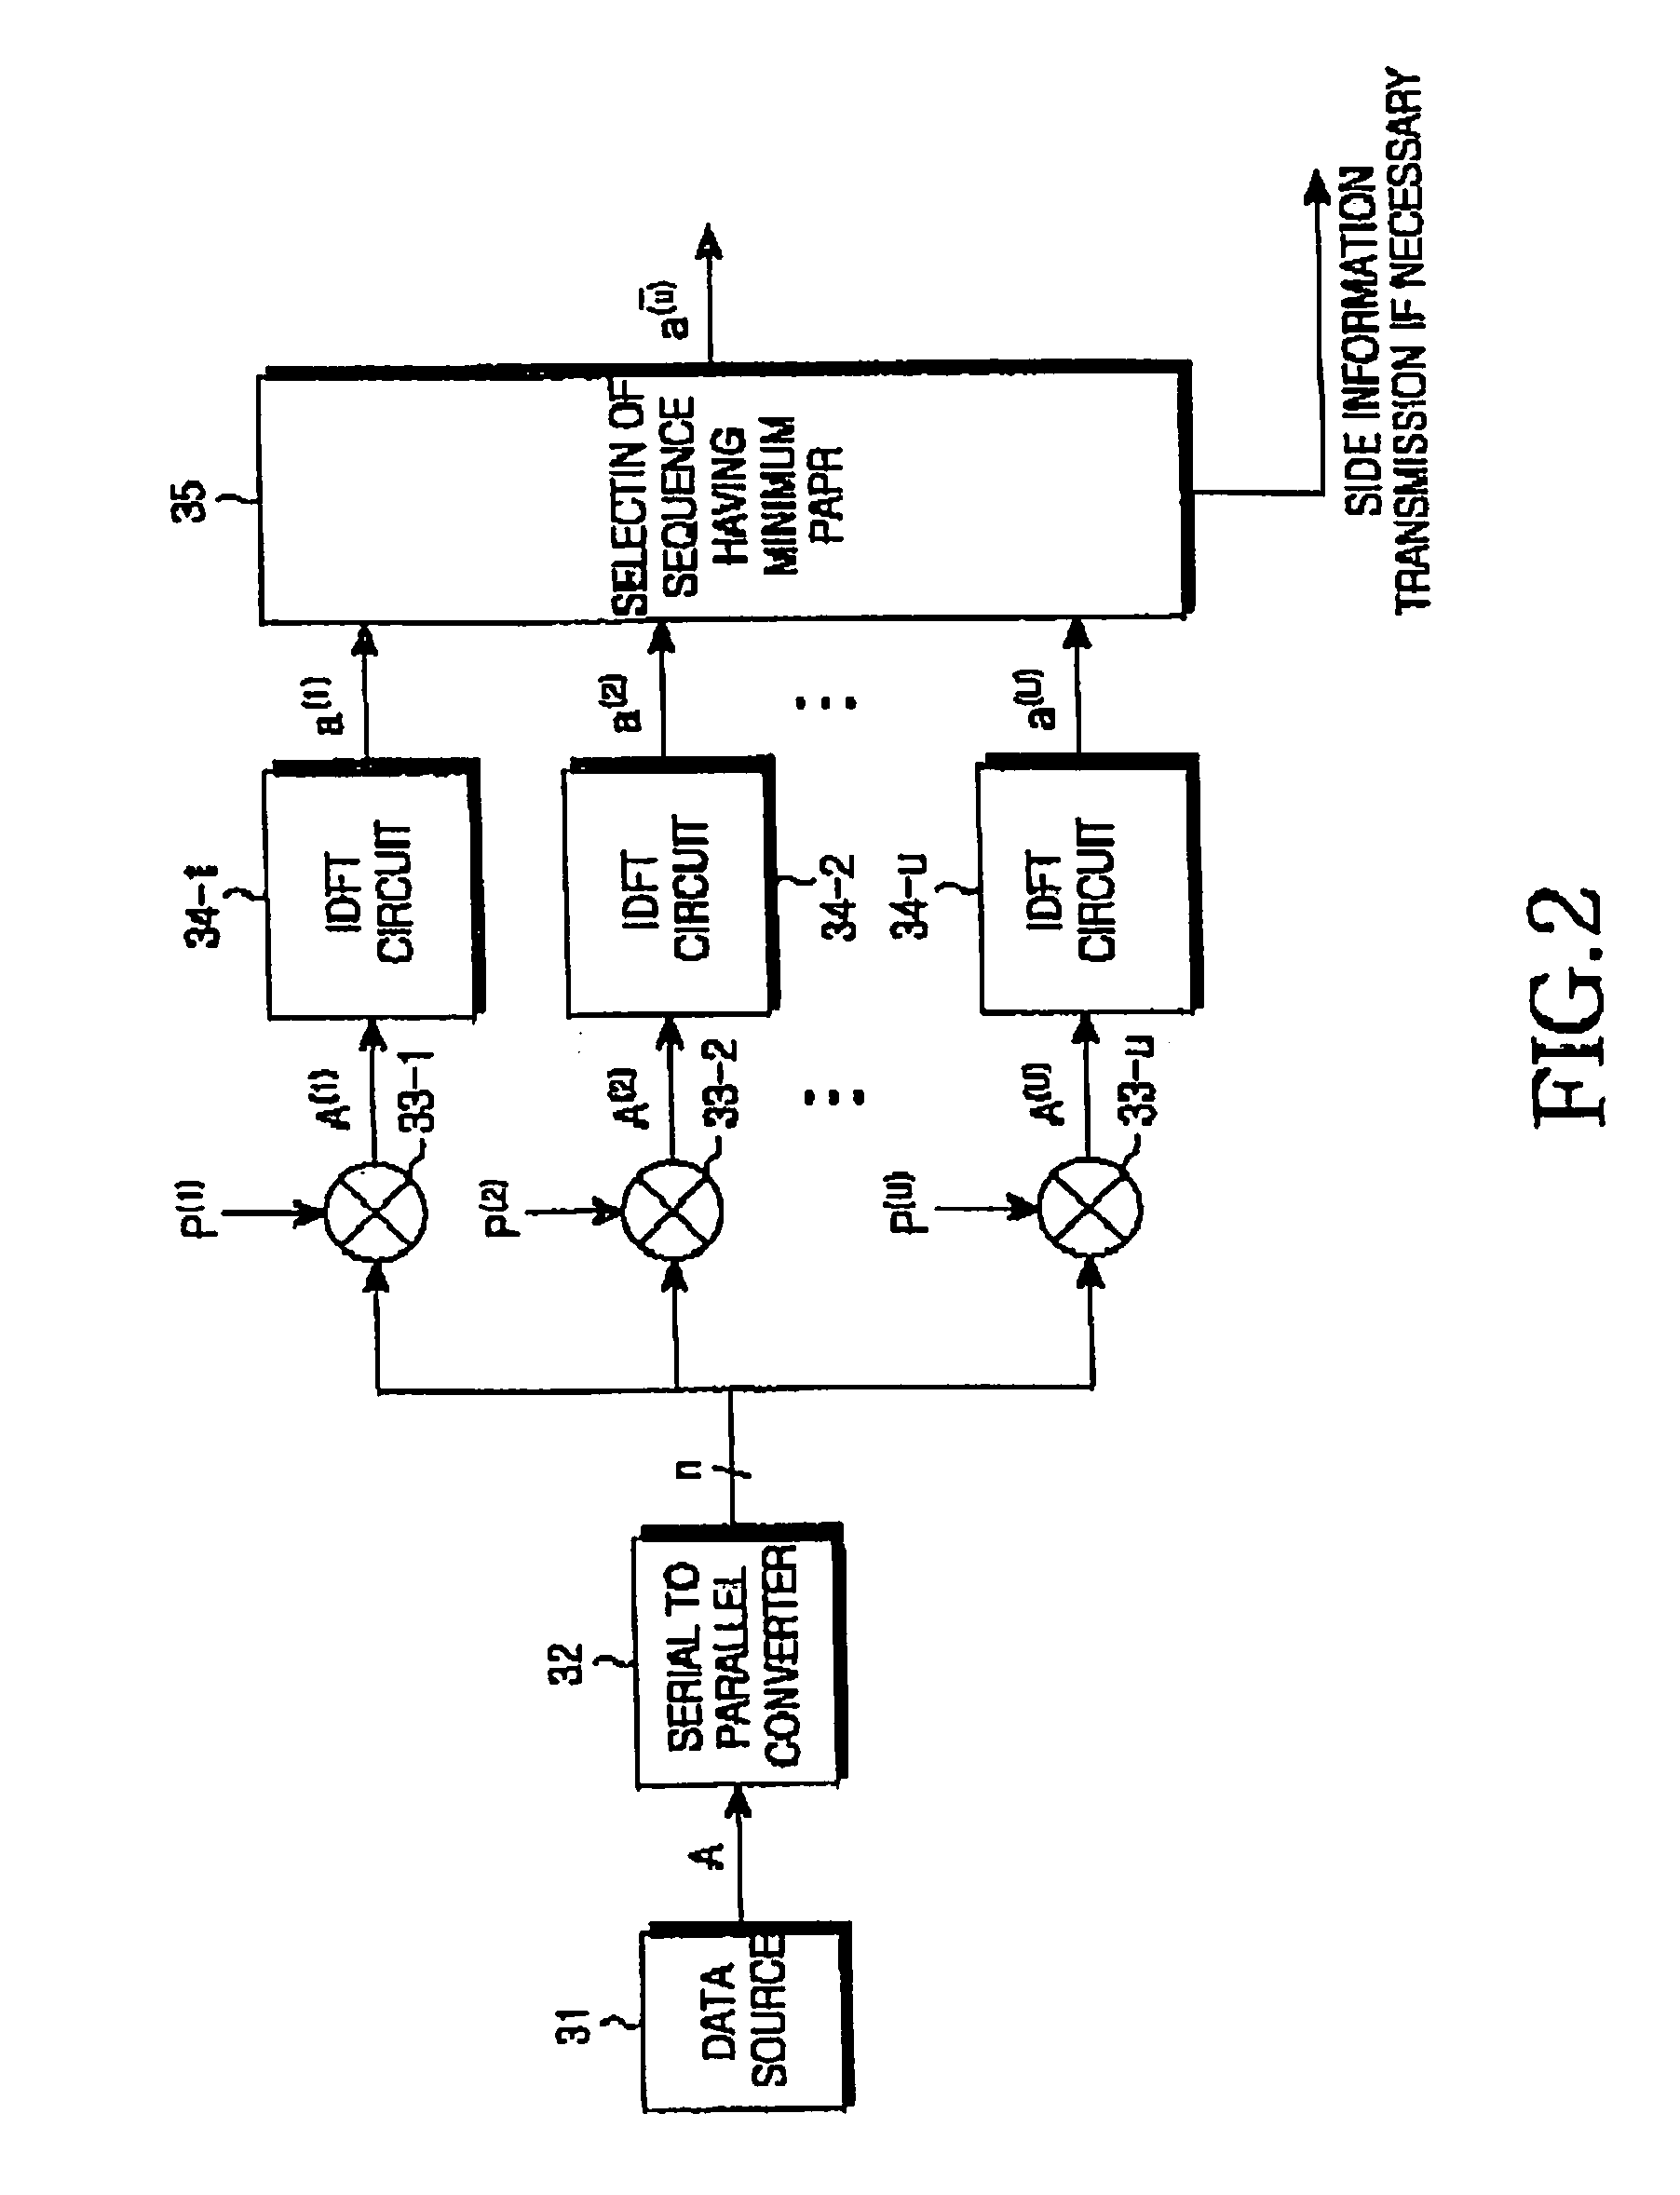 Method and apparatus for performing digital communications